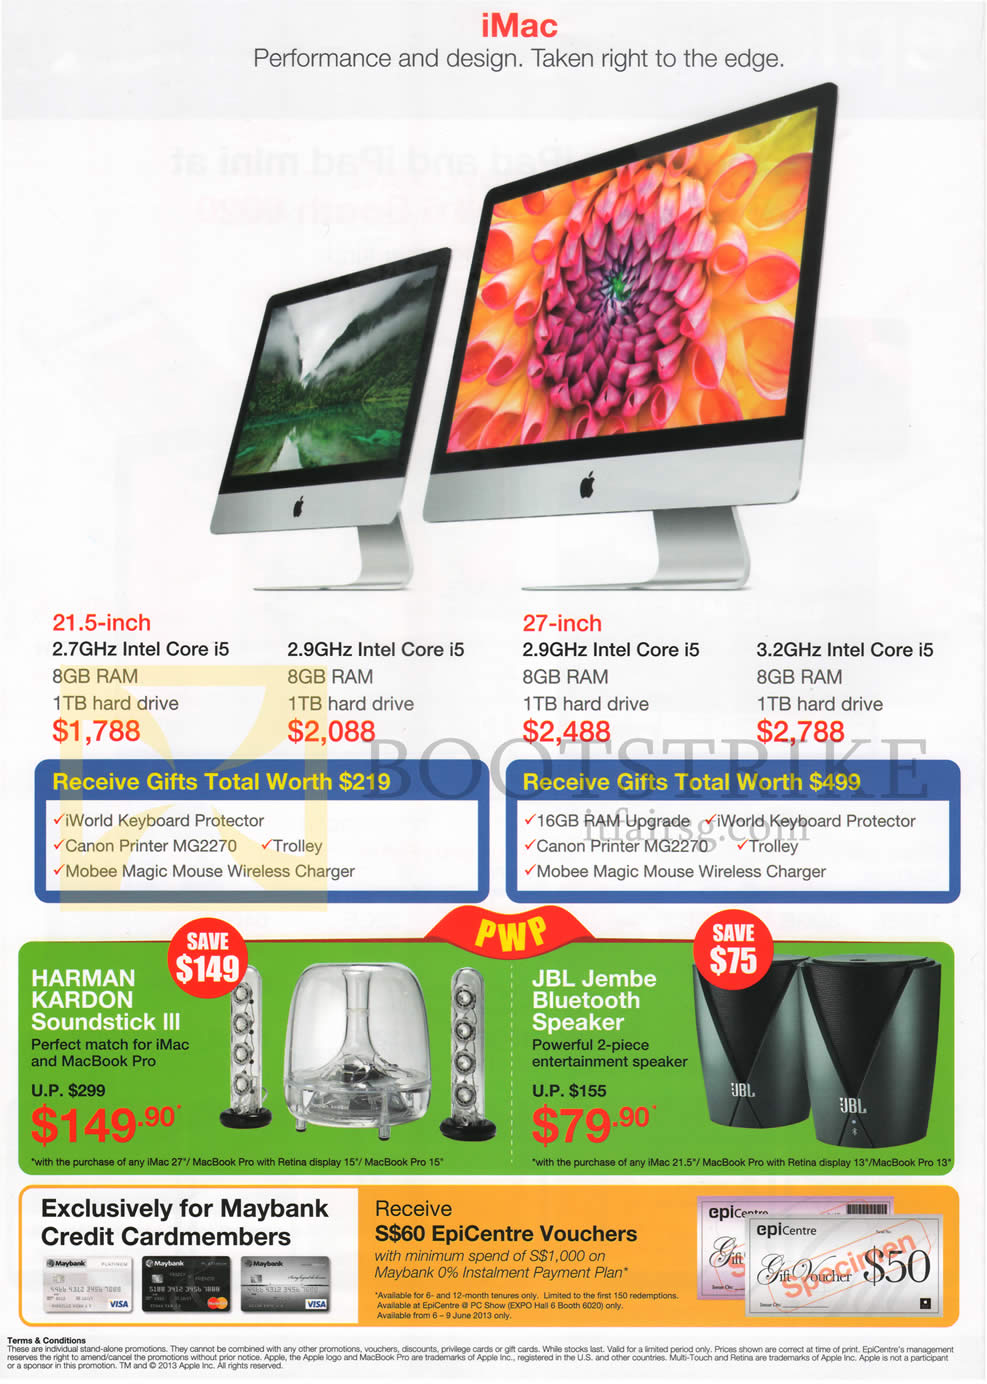 PC SHOW 2013 price list image brochure of Epicentre Apple IMac AIO Desktop PC, Purchase With Purchase, Maybank